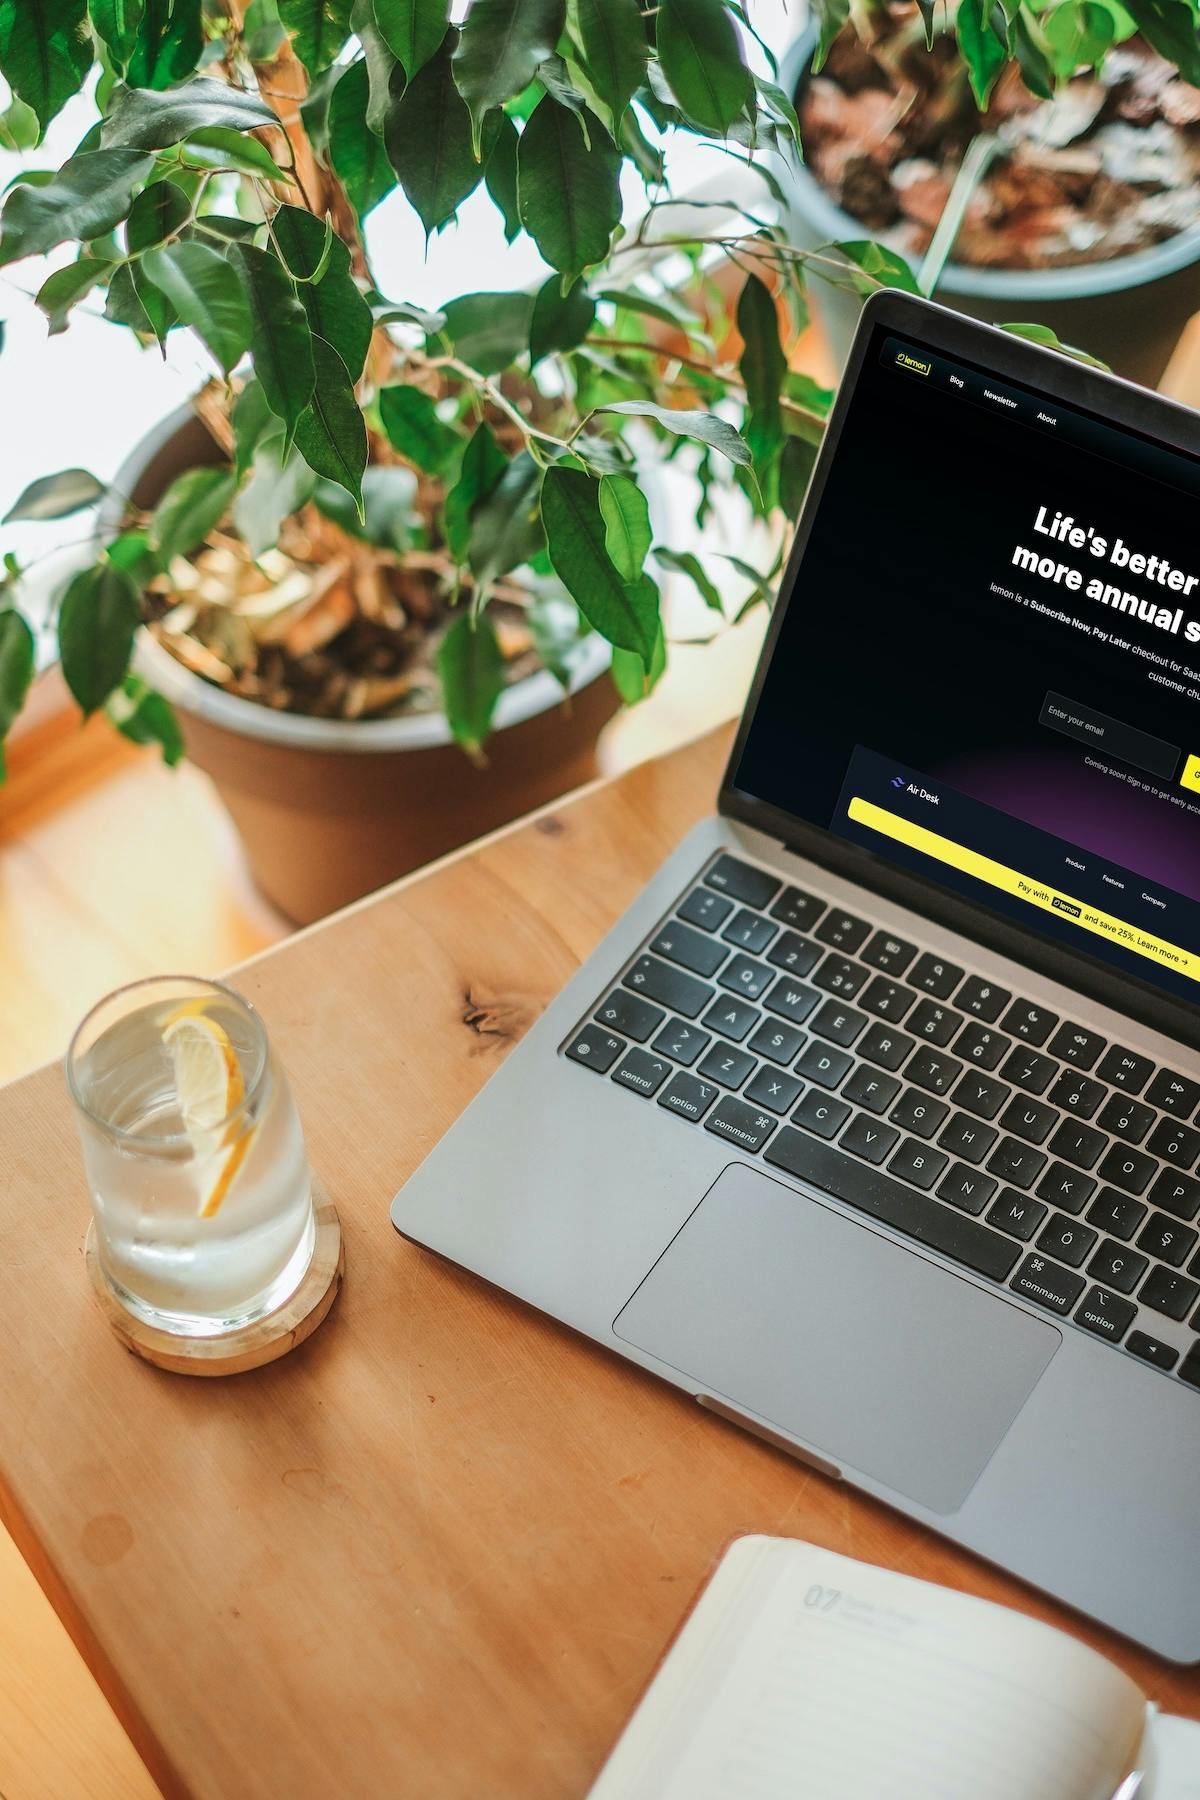 lemon website on laptop next to a glass with a lemon in it.